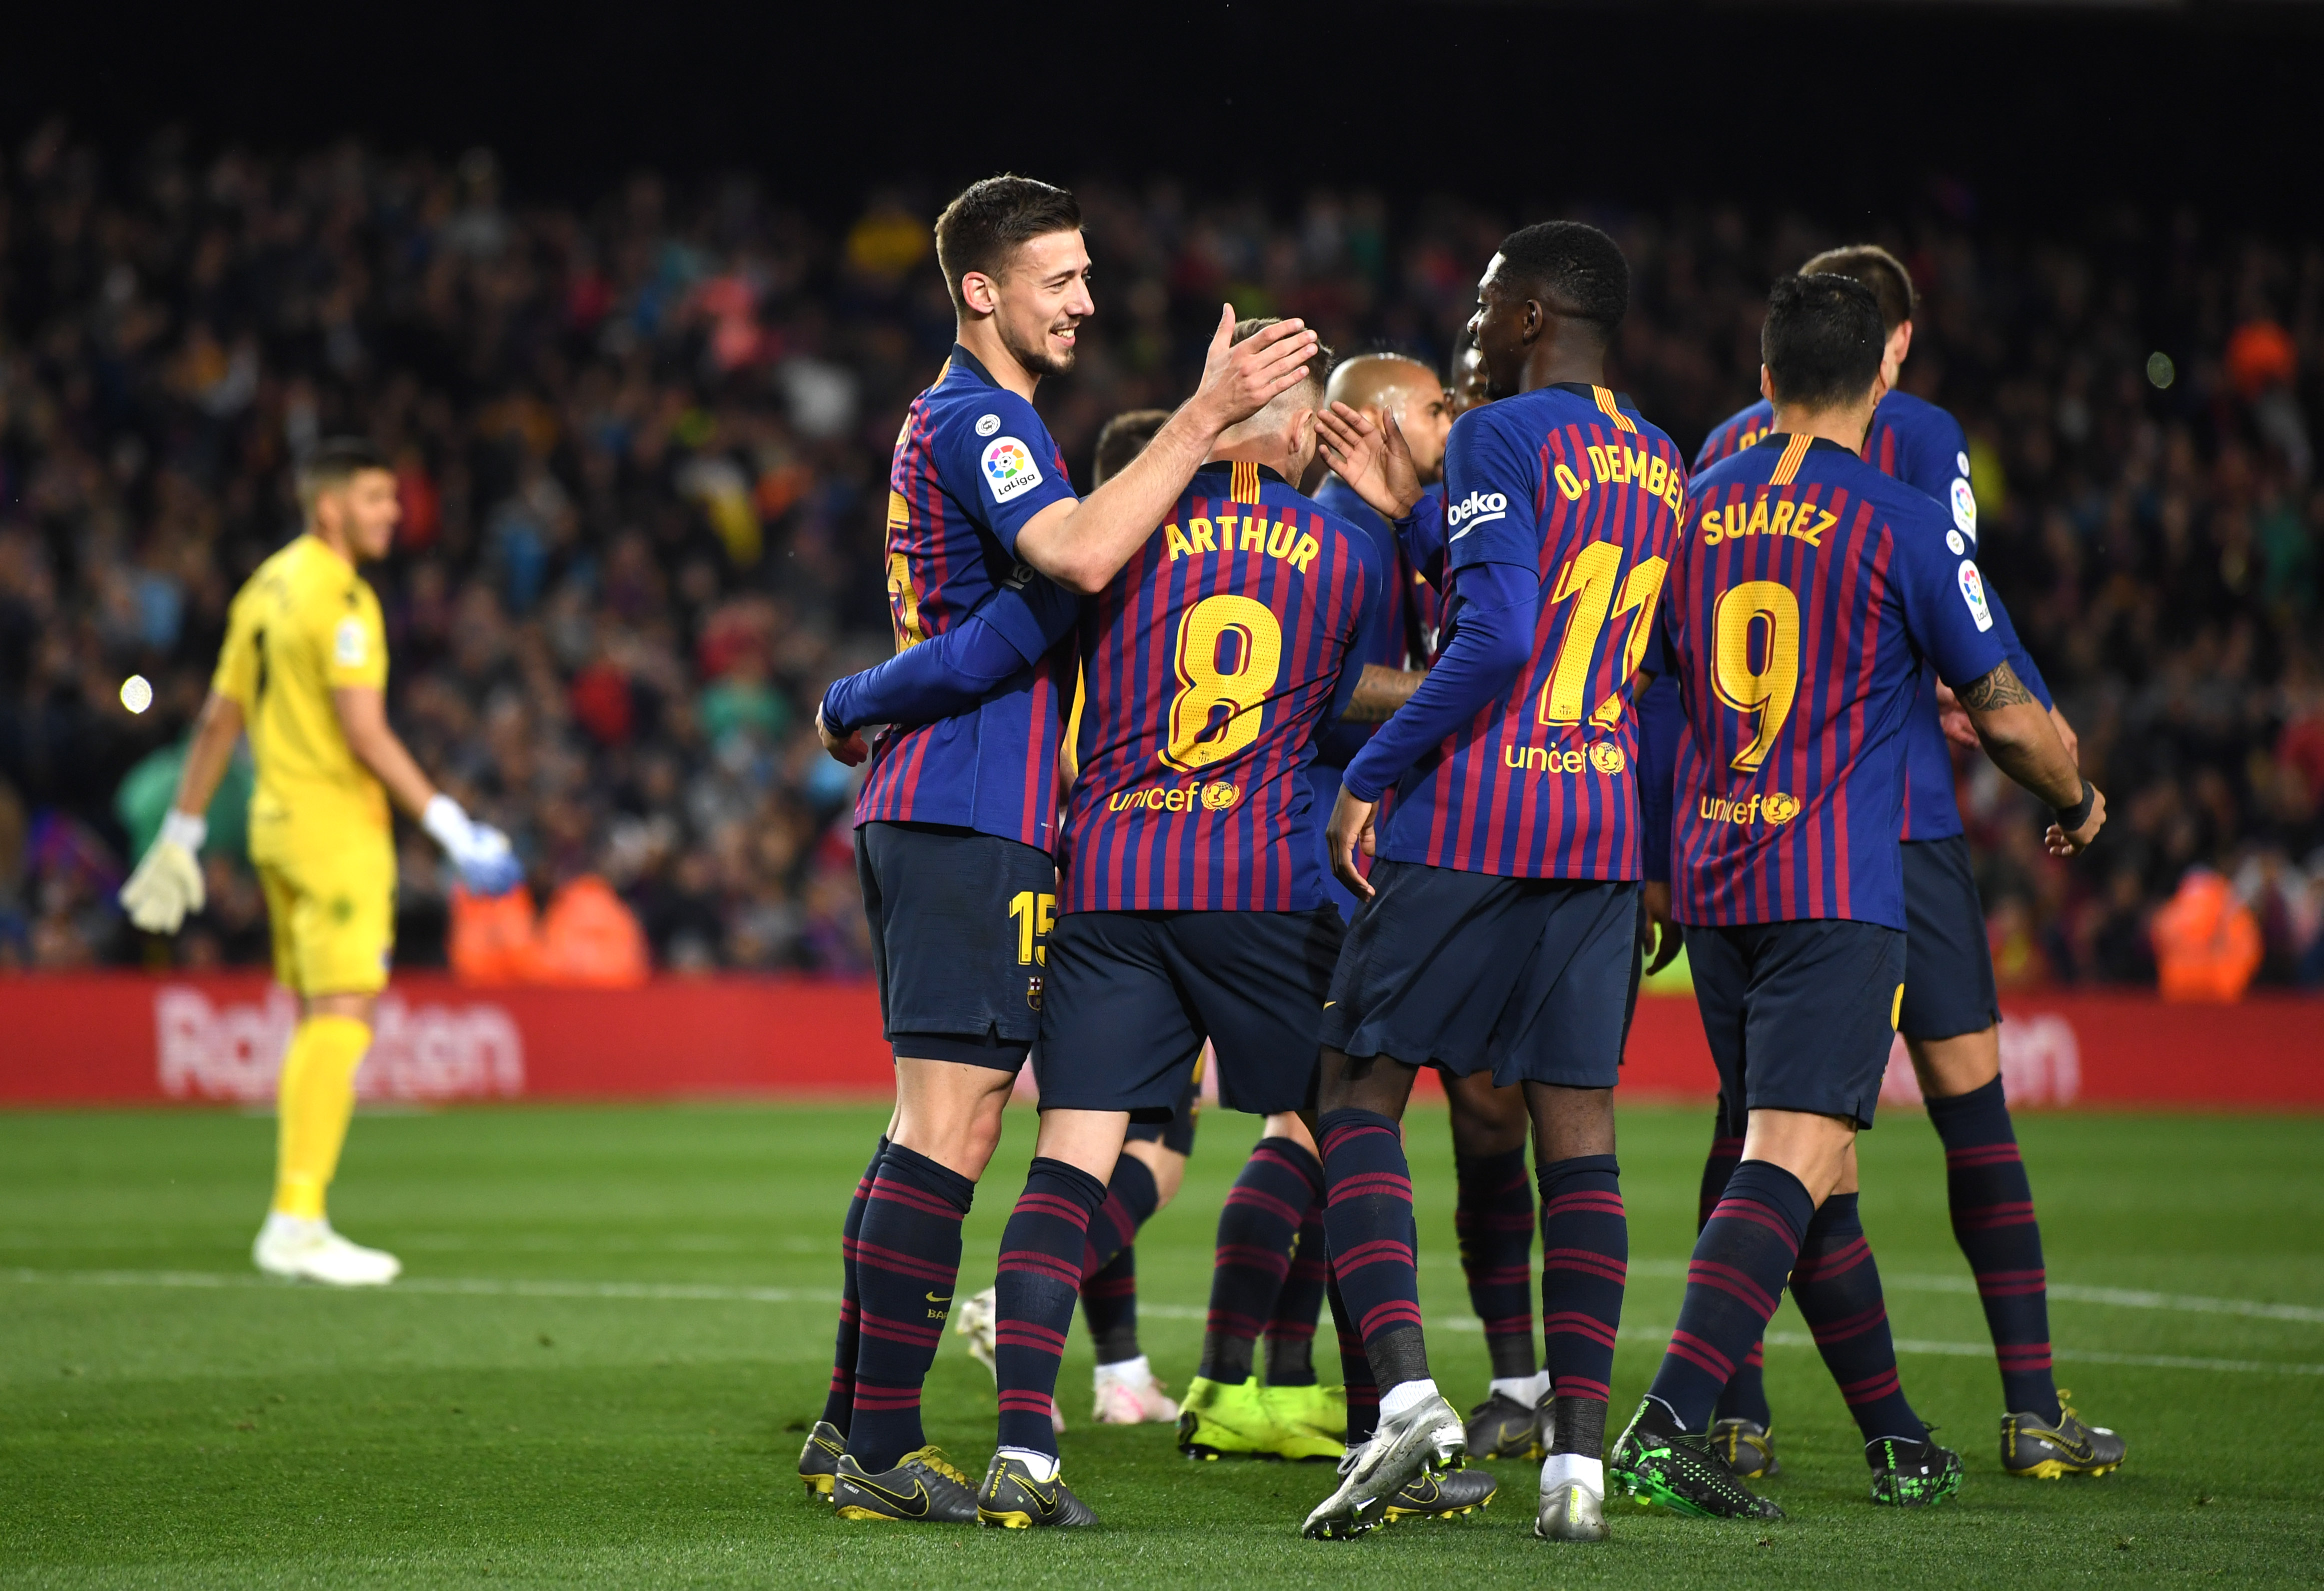 BARCELONA, SPAIN - APRIL 20:  Clement Lenglet of Barcelona celebrates with team mates after he scores his sides first goal during the La Liga match between FC Barcelona and Real Sociedad at Camp Nou on April 20, 2019 in Barcelona, Spain. (Photo by David Ramos/Getty Images)